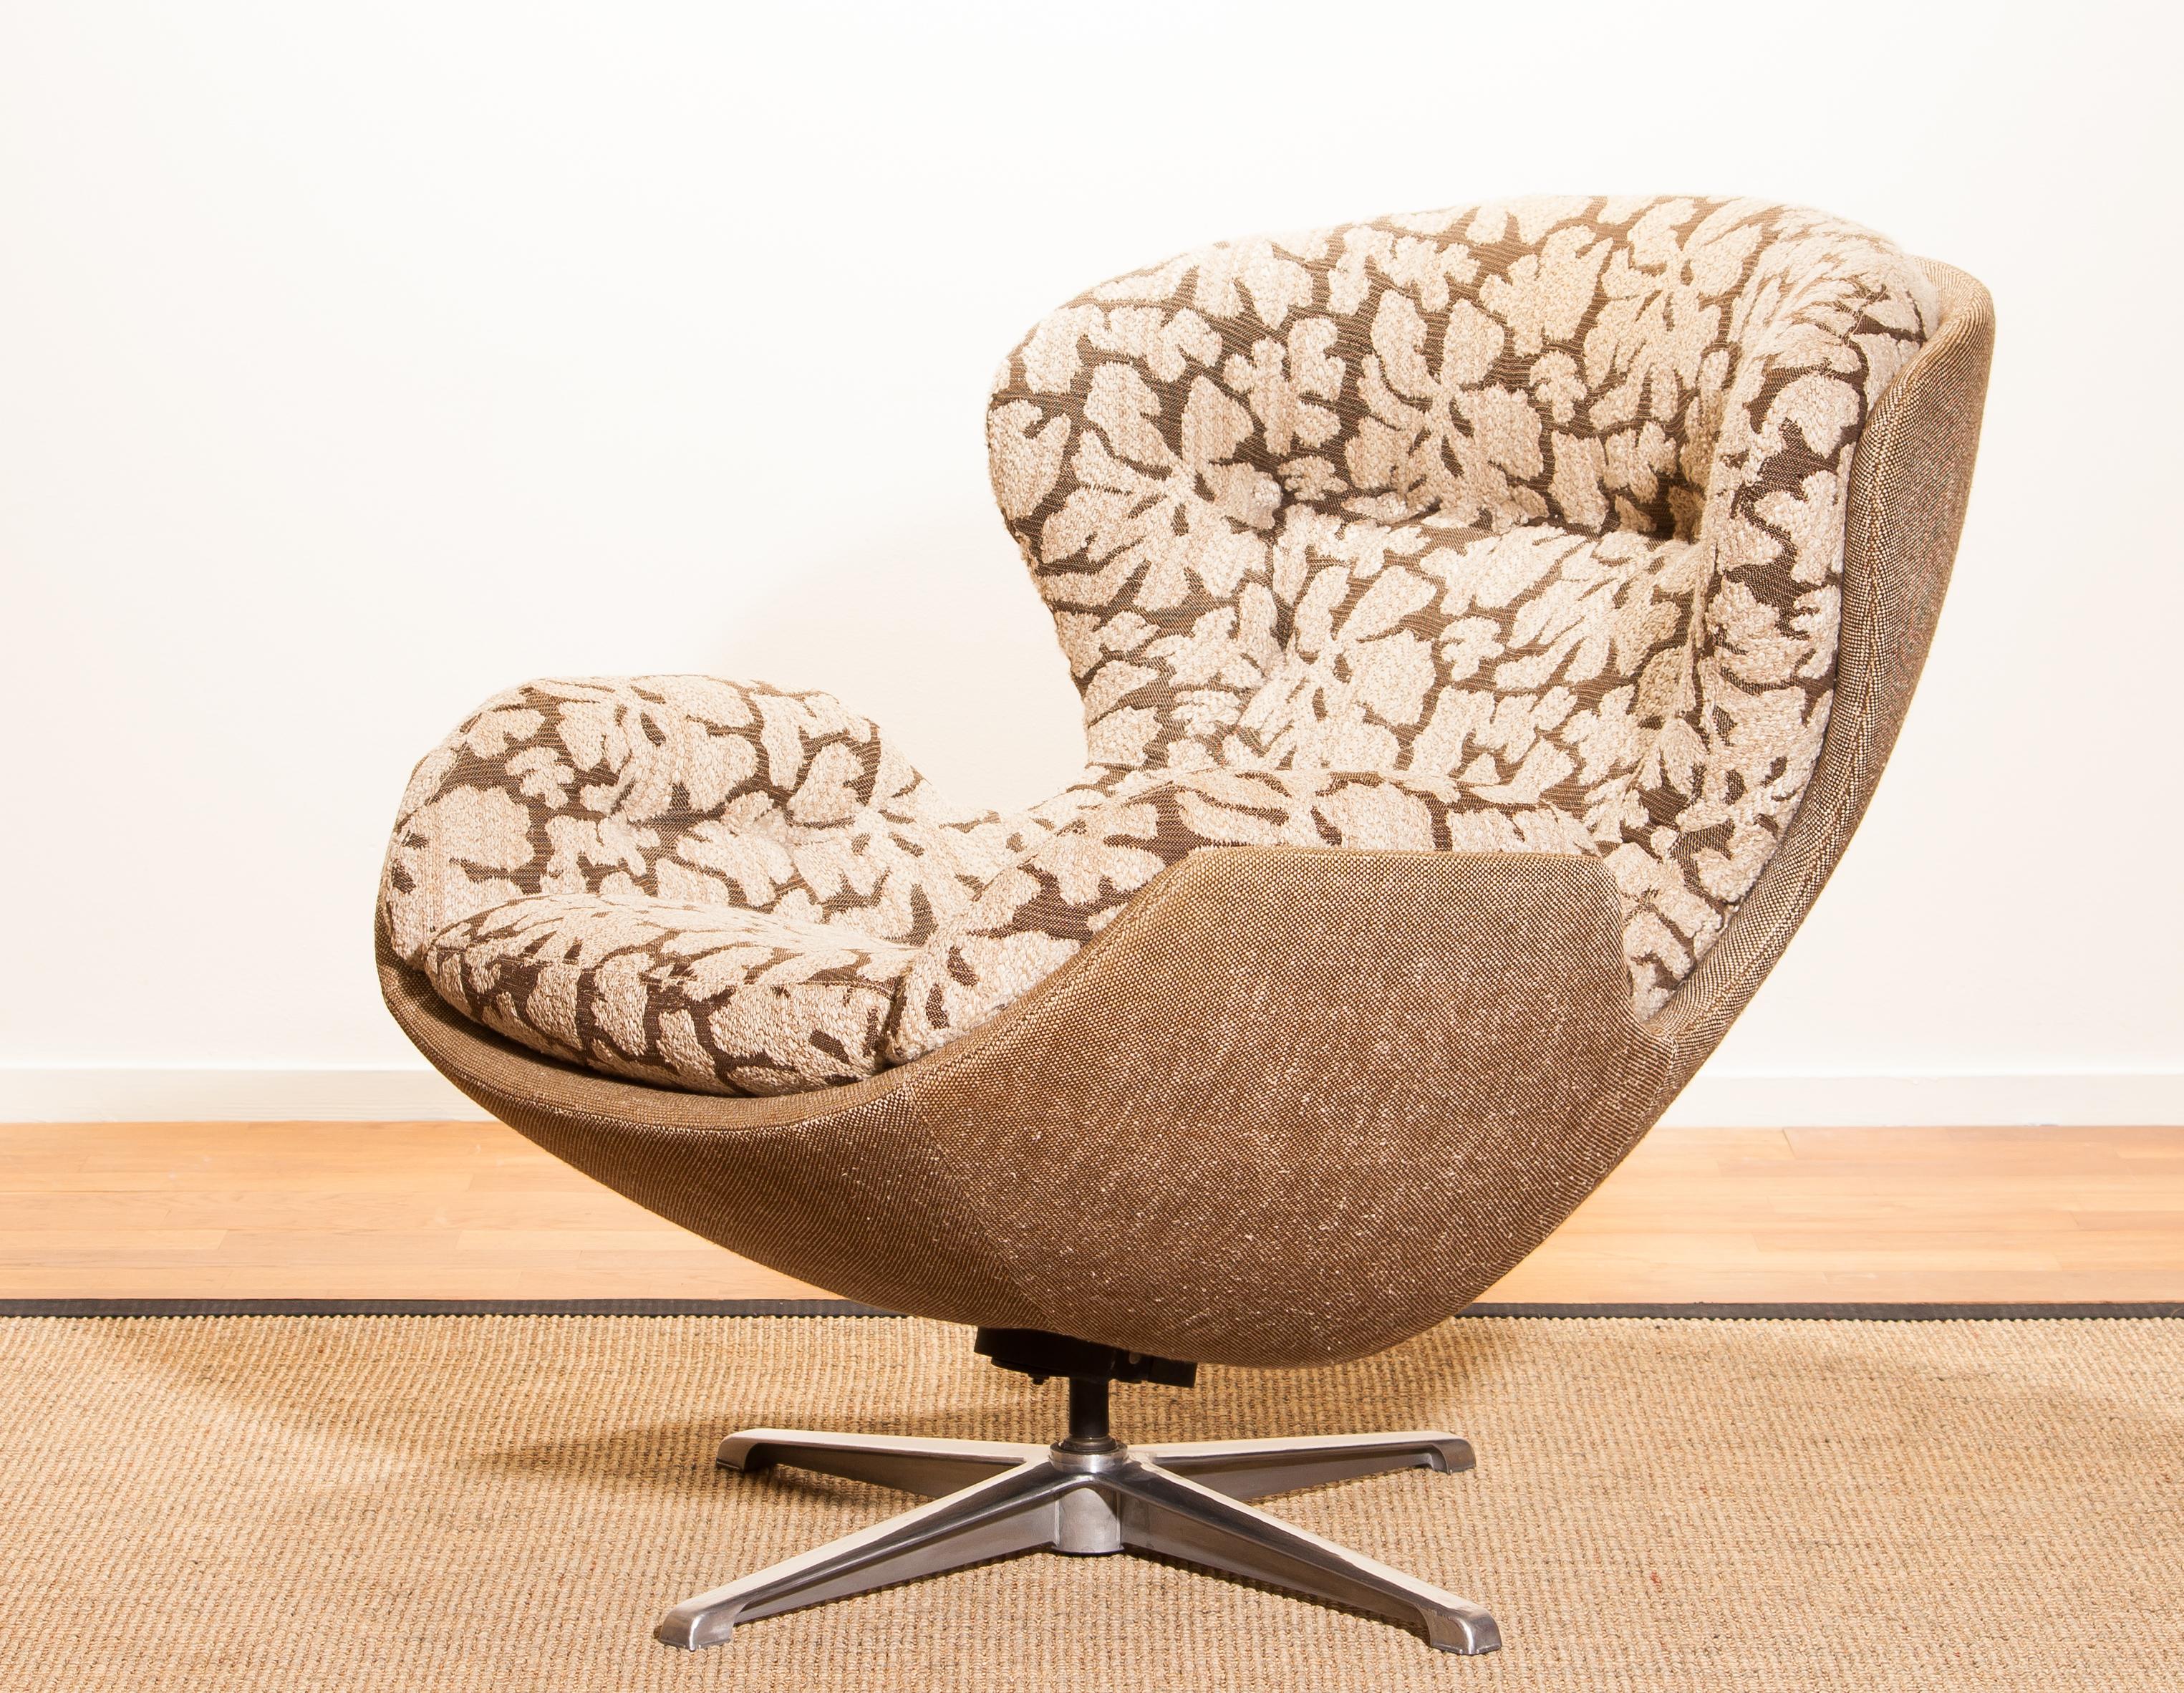 Beautiful swivel lounge chair designed by Lennart Bender for Ulferts Möbler, Sweden.
This comfortable chair is made of a steel swivel frame with an original fabric upholstered seating.
Period, 1970s
Dimensions: H 90 cm, W 82 cm, D 95 cm.